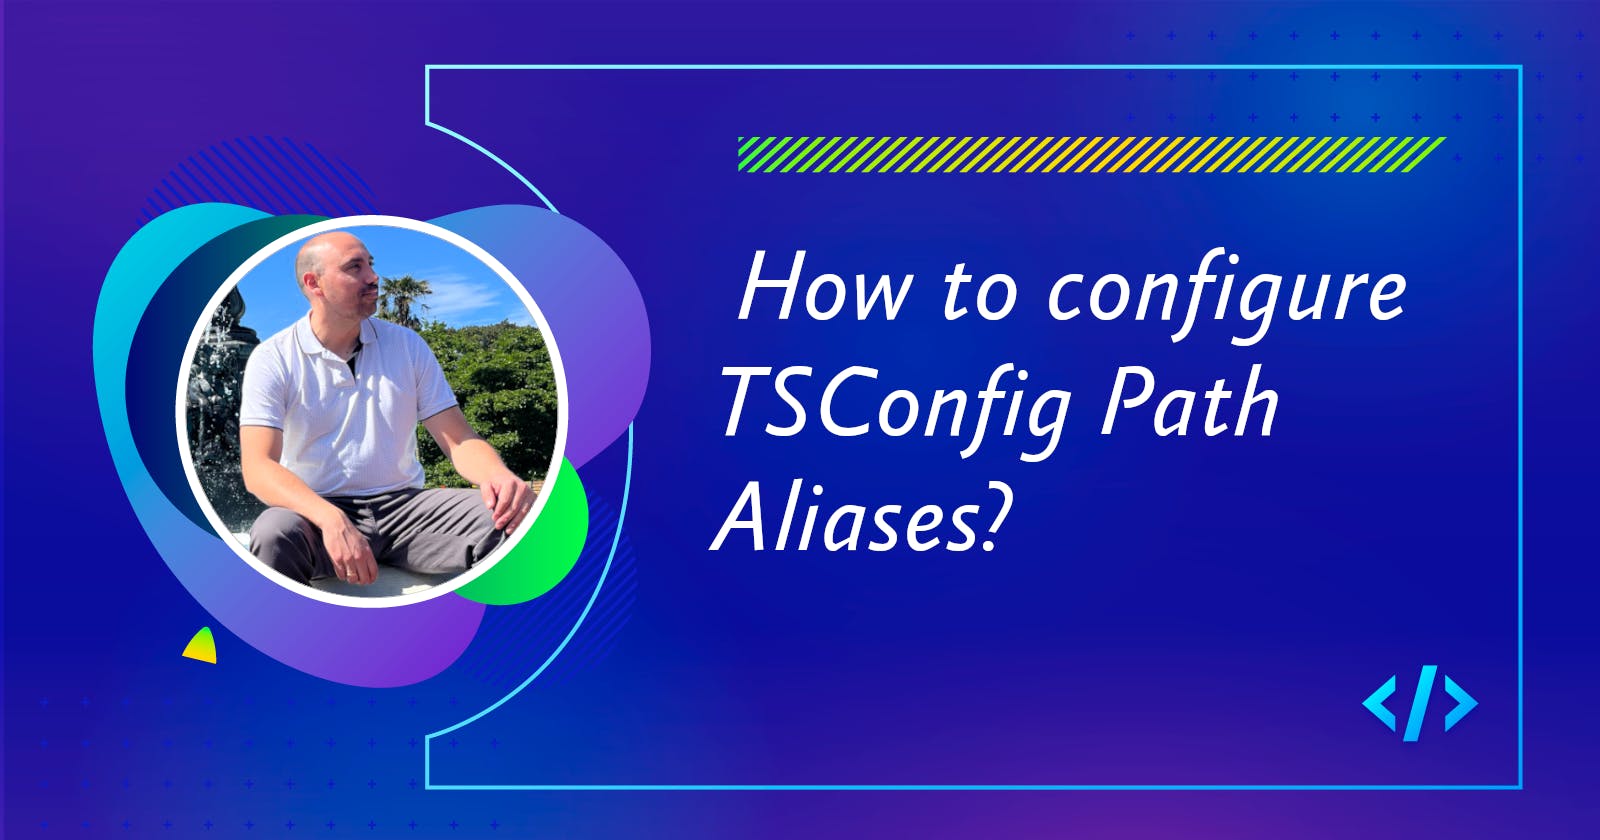 How to configure TSConfig Path Aliases?